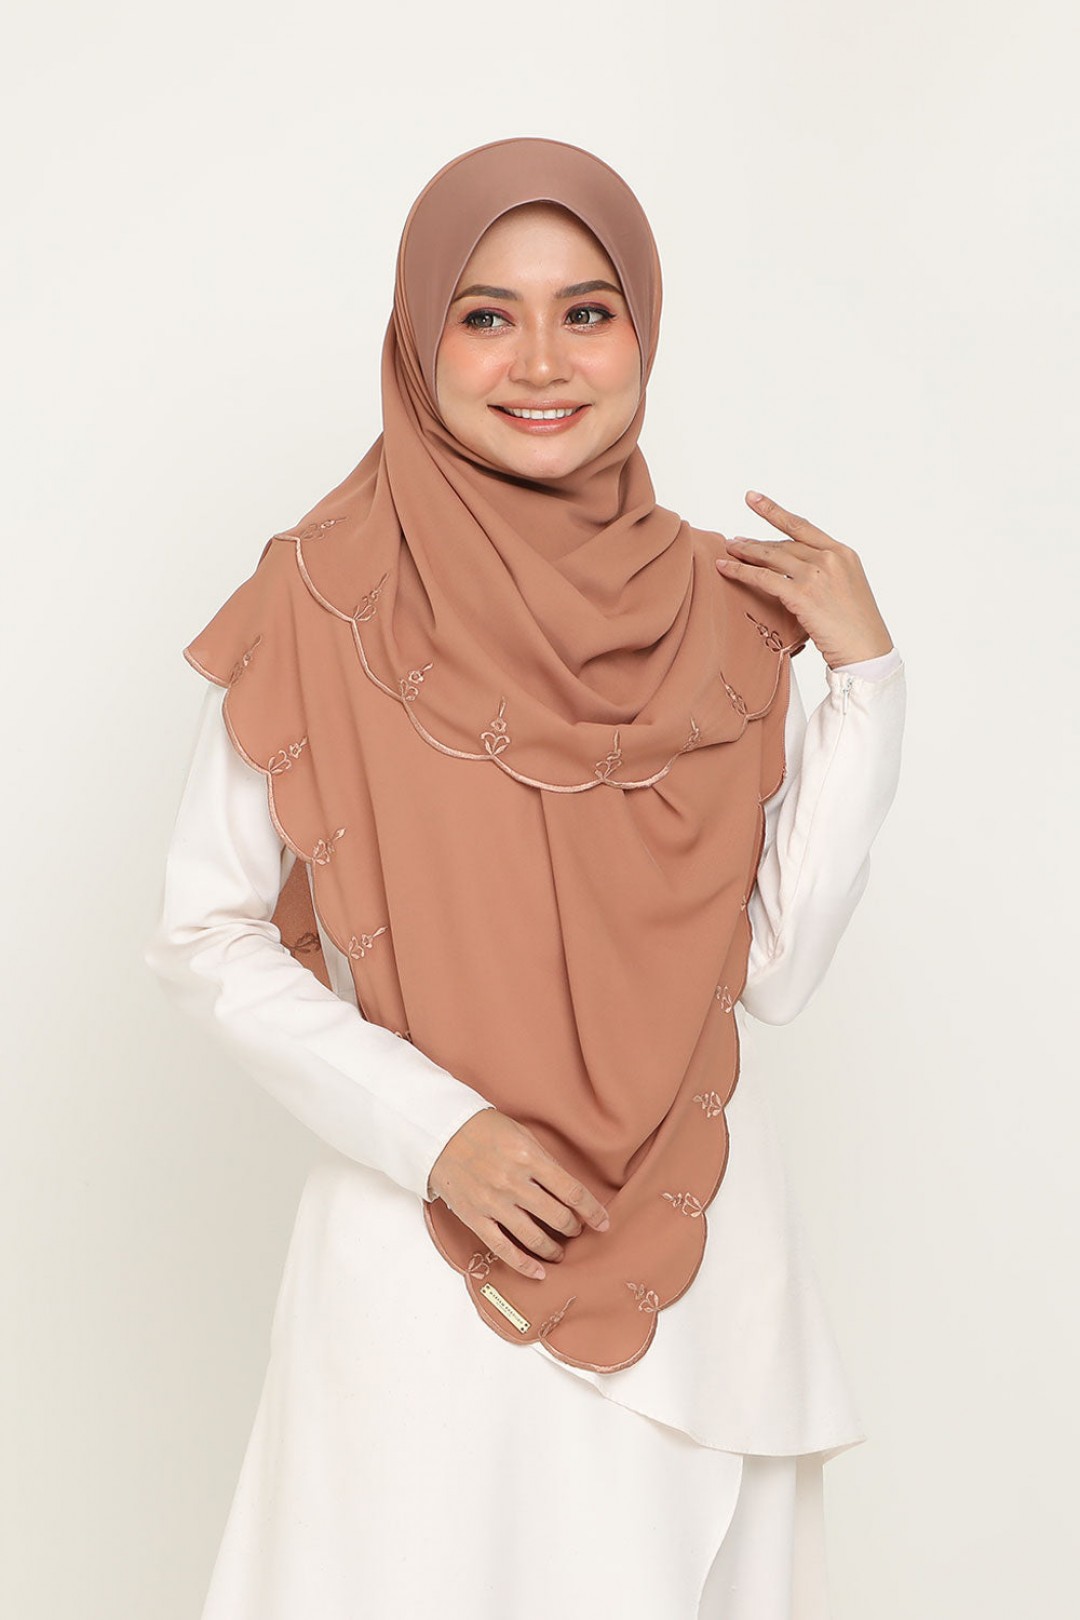 As-Is Instant Bawal Sulam Caramel Brown